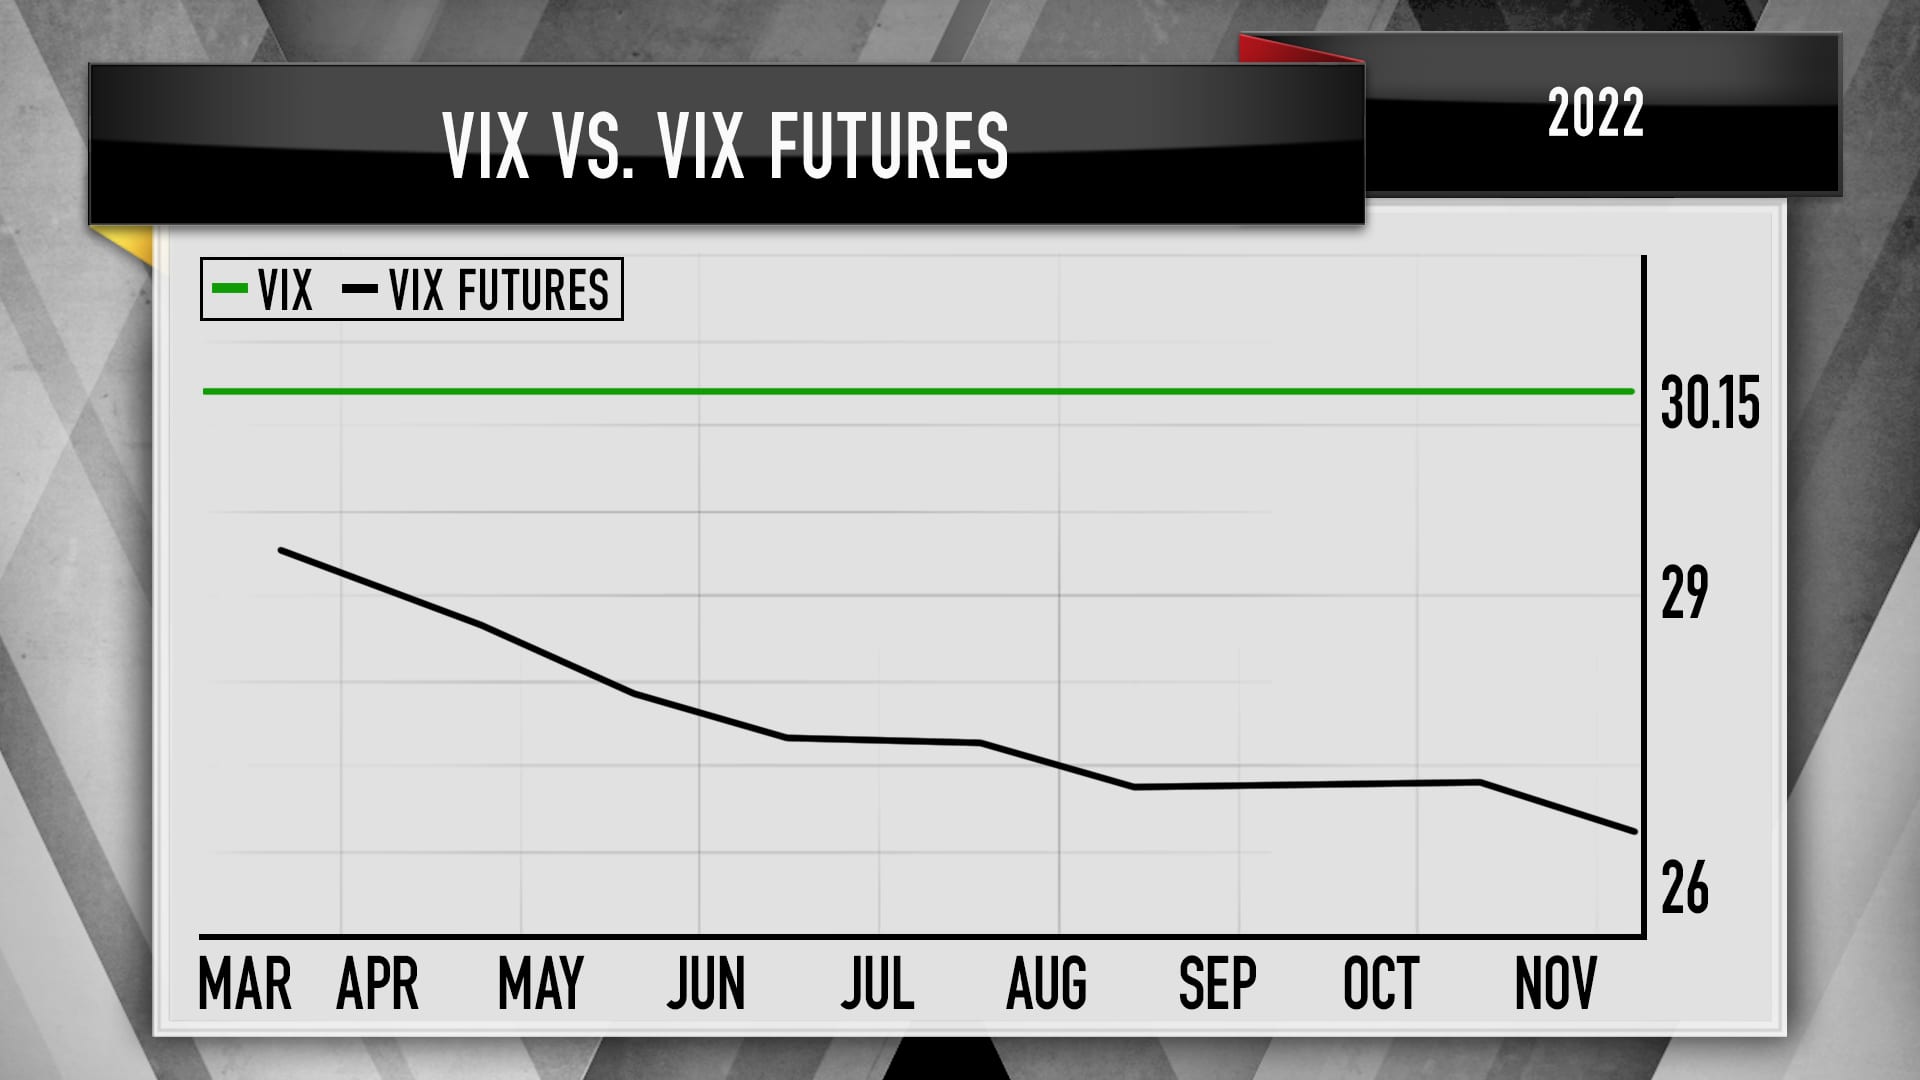 VIX futures have entered a state of backwardation, when near-term contracts are more expensive than those for months later in the year.